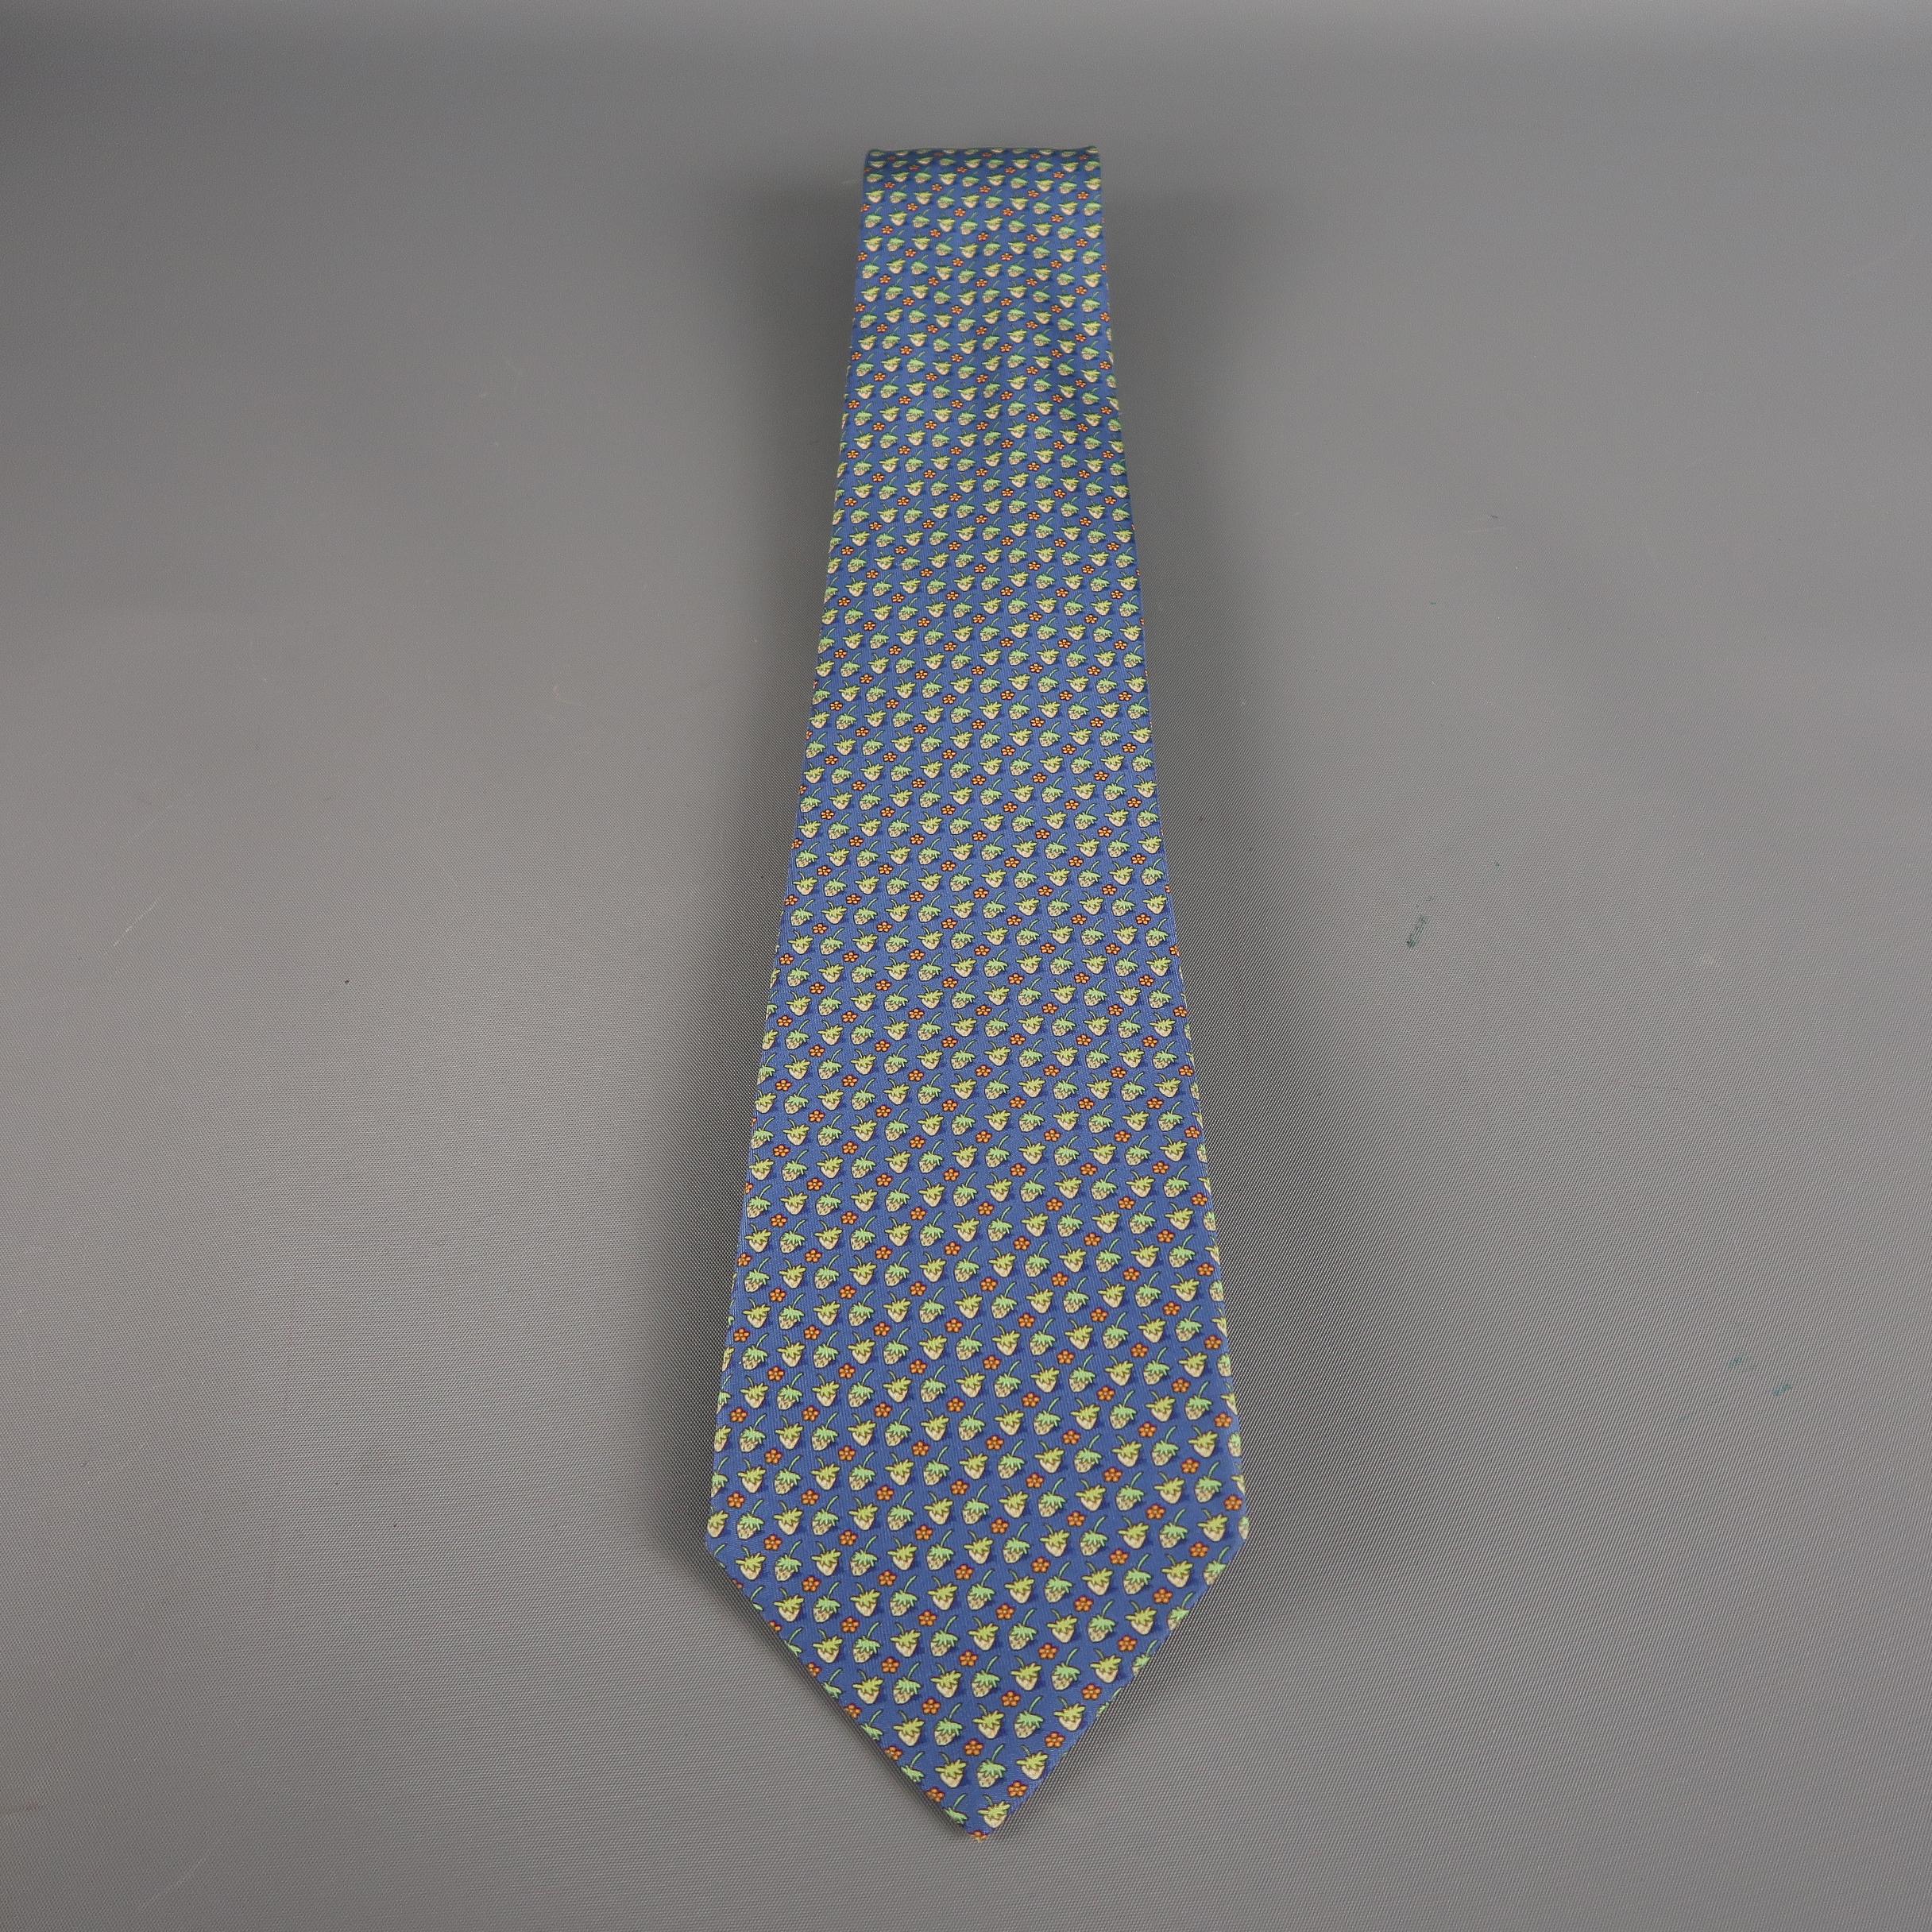 SALVATORE FERRAGAMO  tie come in blue and green silk  with an all over strawberry print. Made in Italy.
 
Excellent Pre-Owned Condition.
 
Width: 4 in.